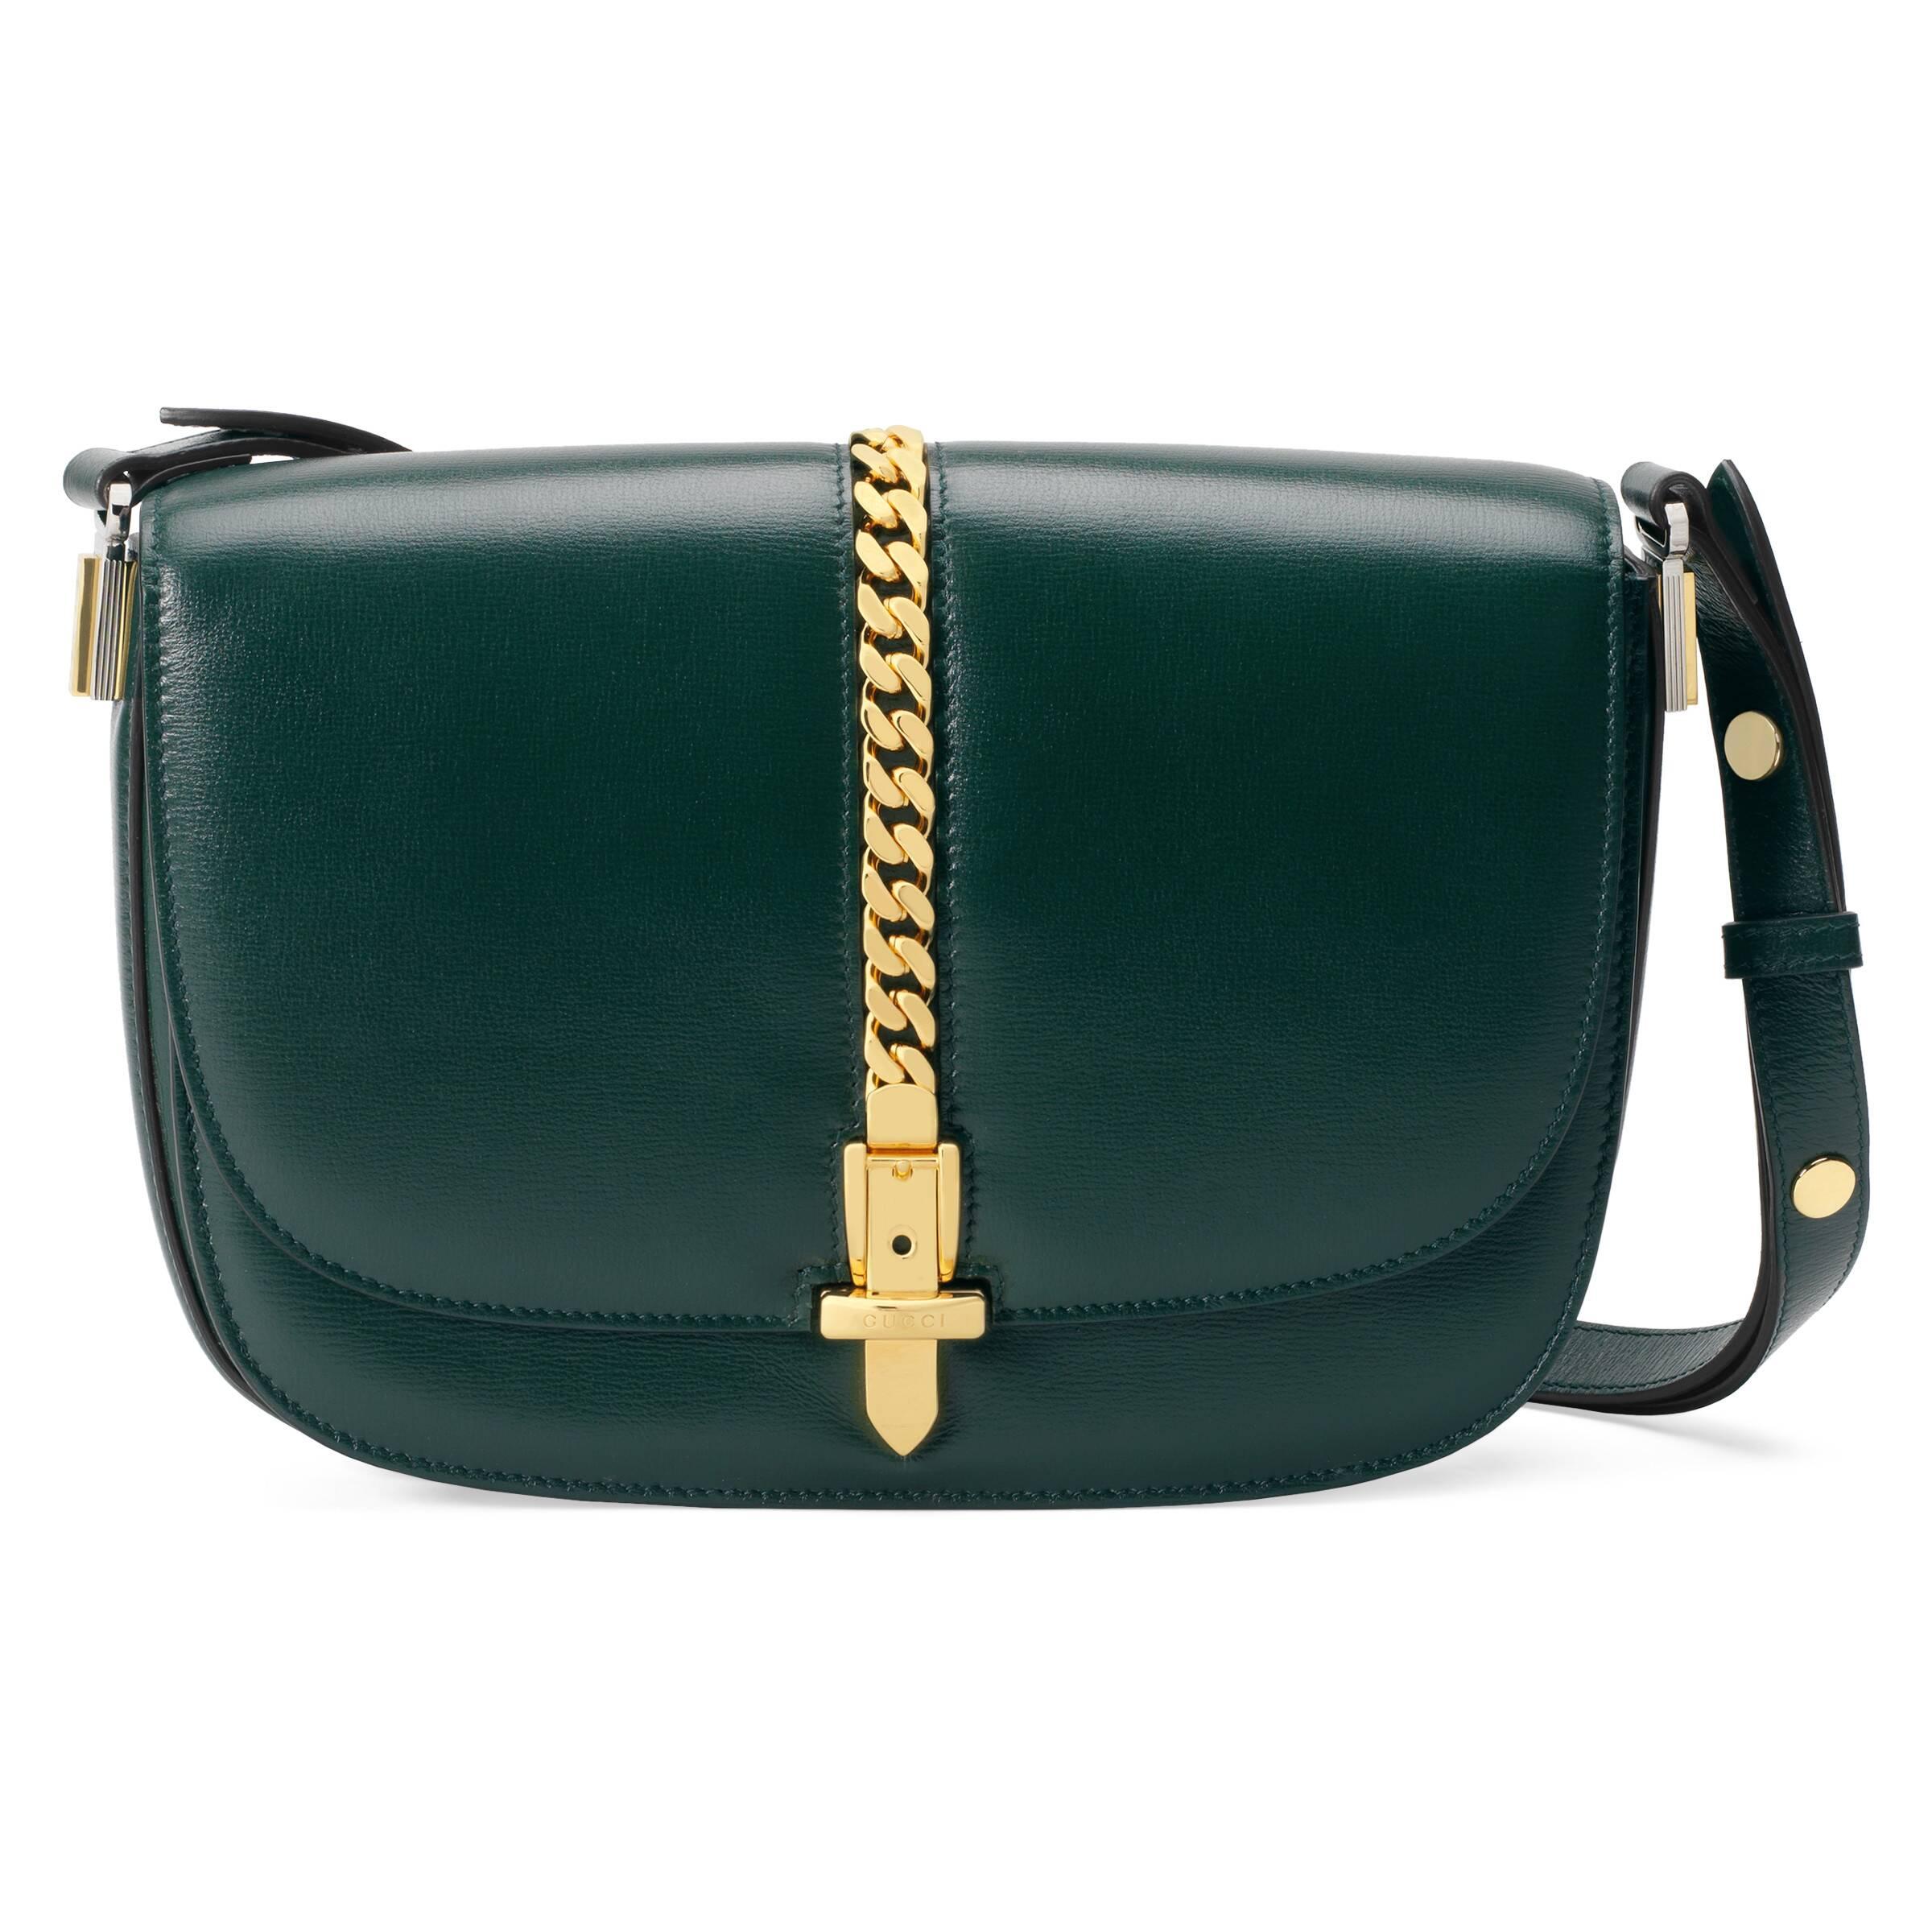 Gucci Sylvie 1969 Small Shoulder Bag in Green | Lyst